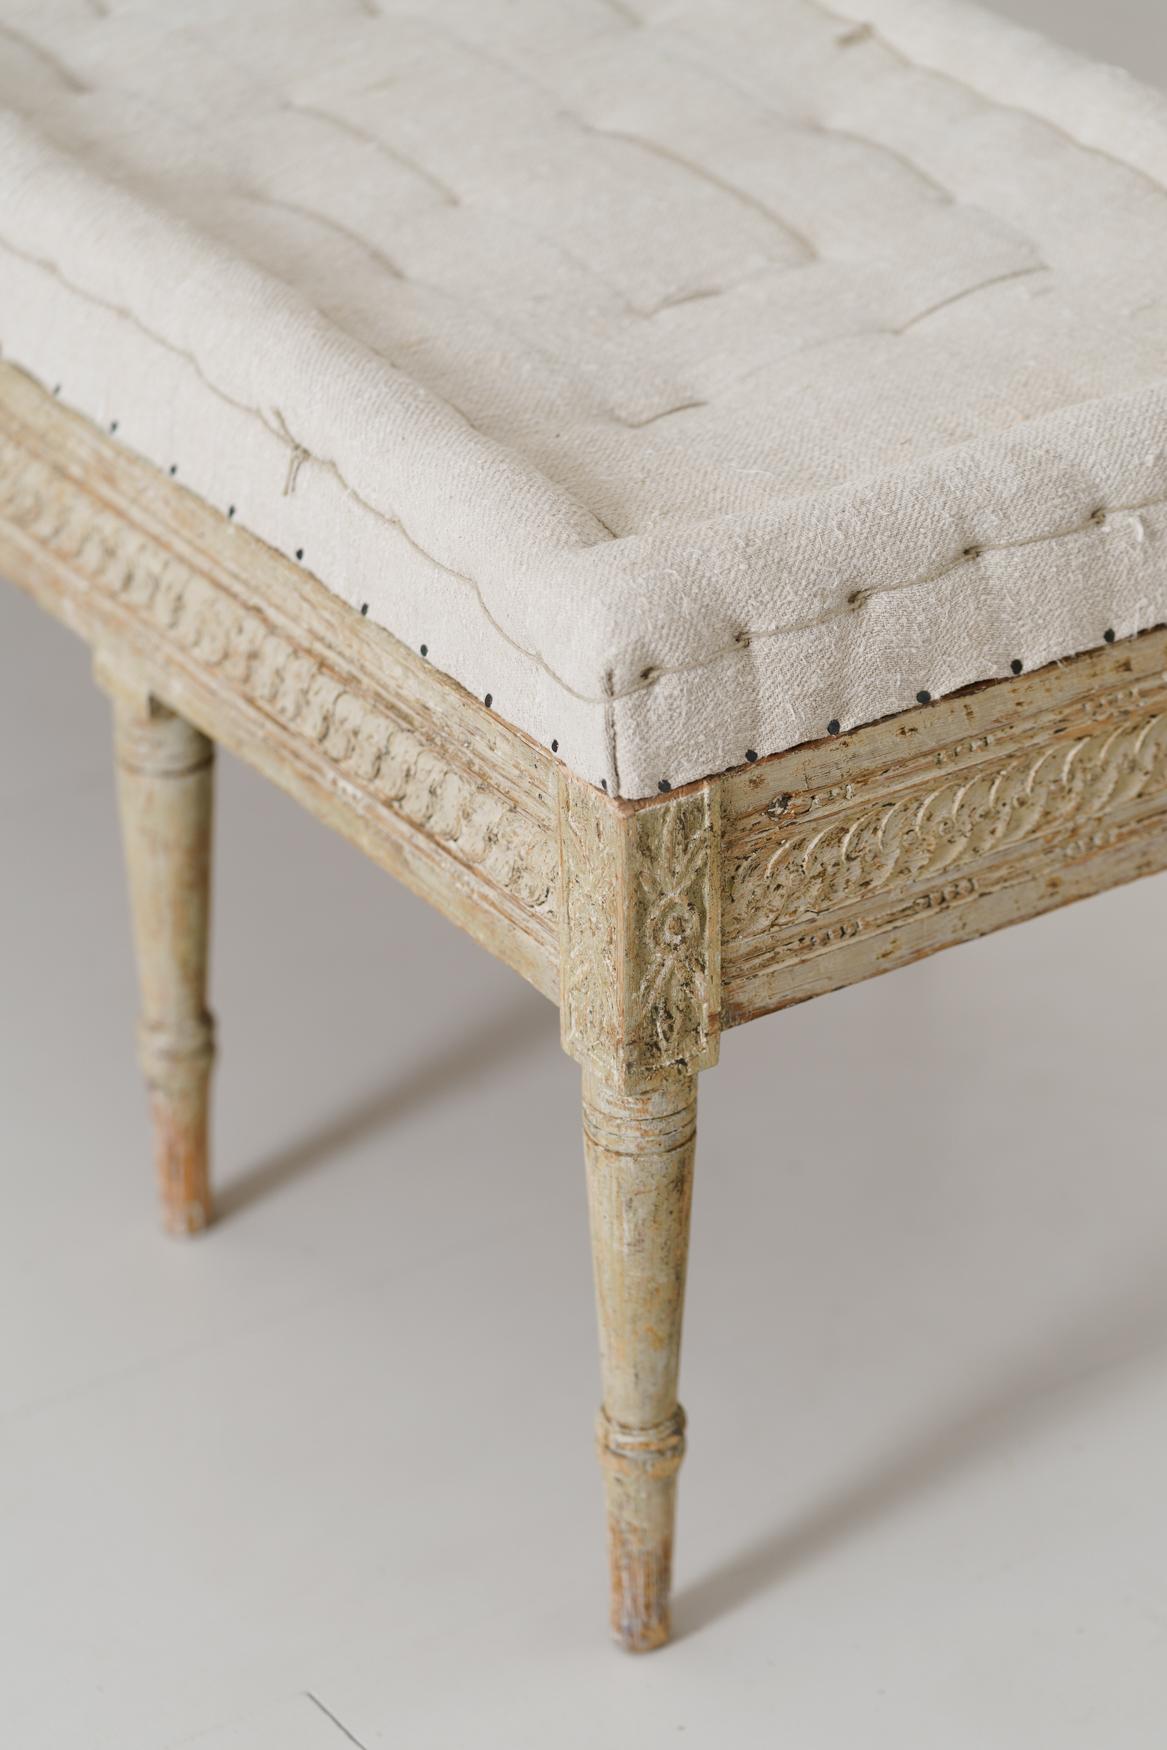 Hand-Crafted 18th Century Swedish Gustavian Period Bench or Footstool in Original Paint